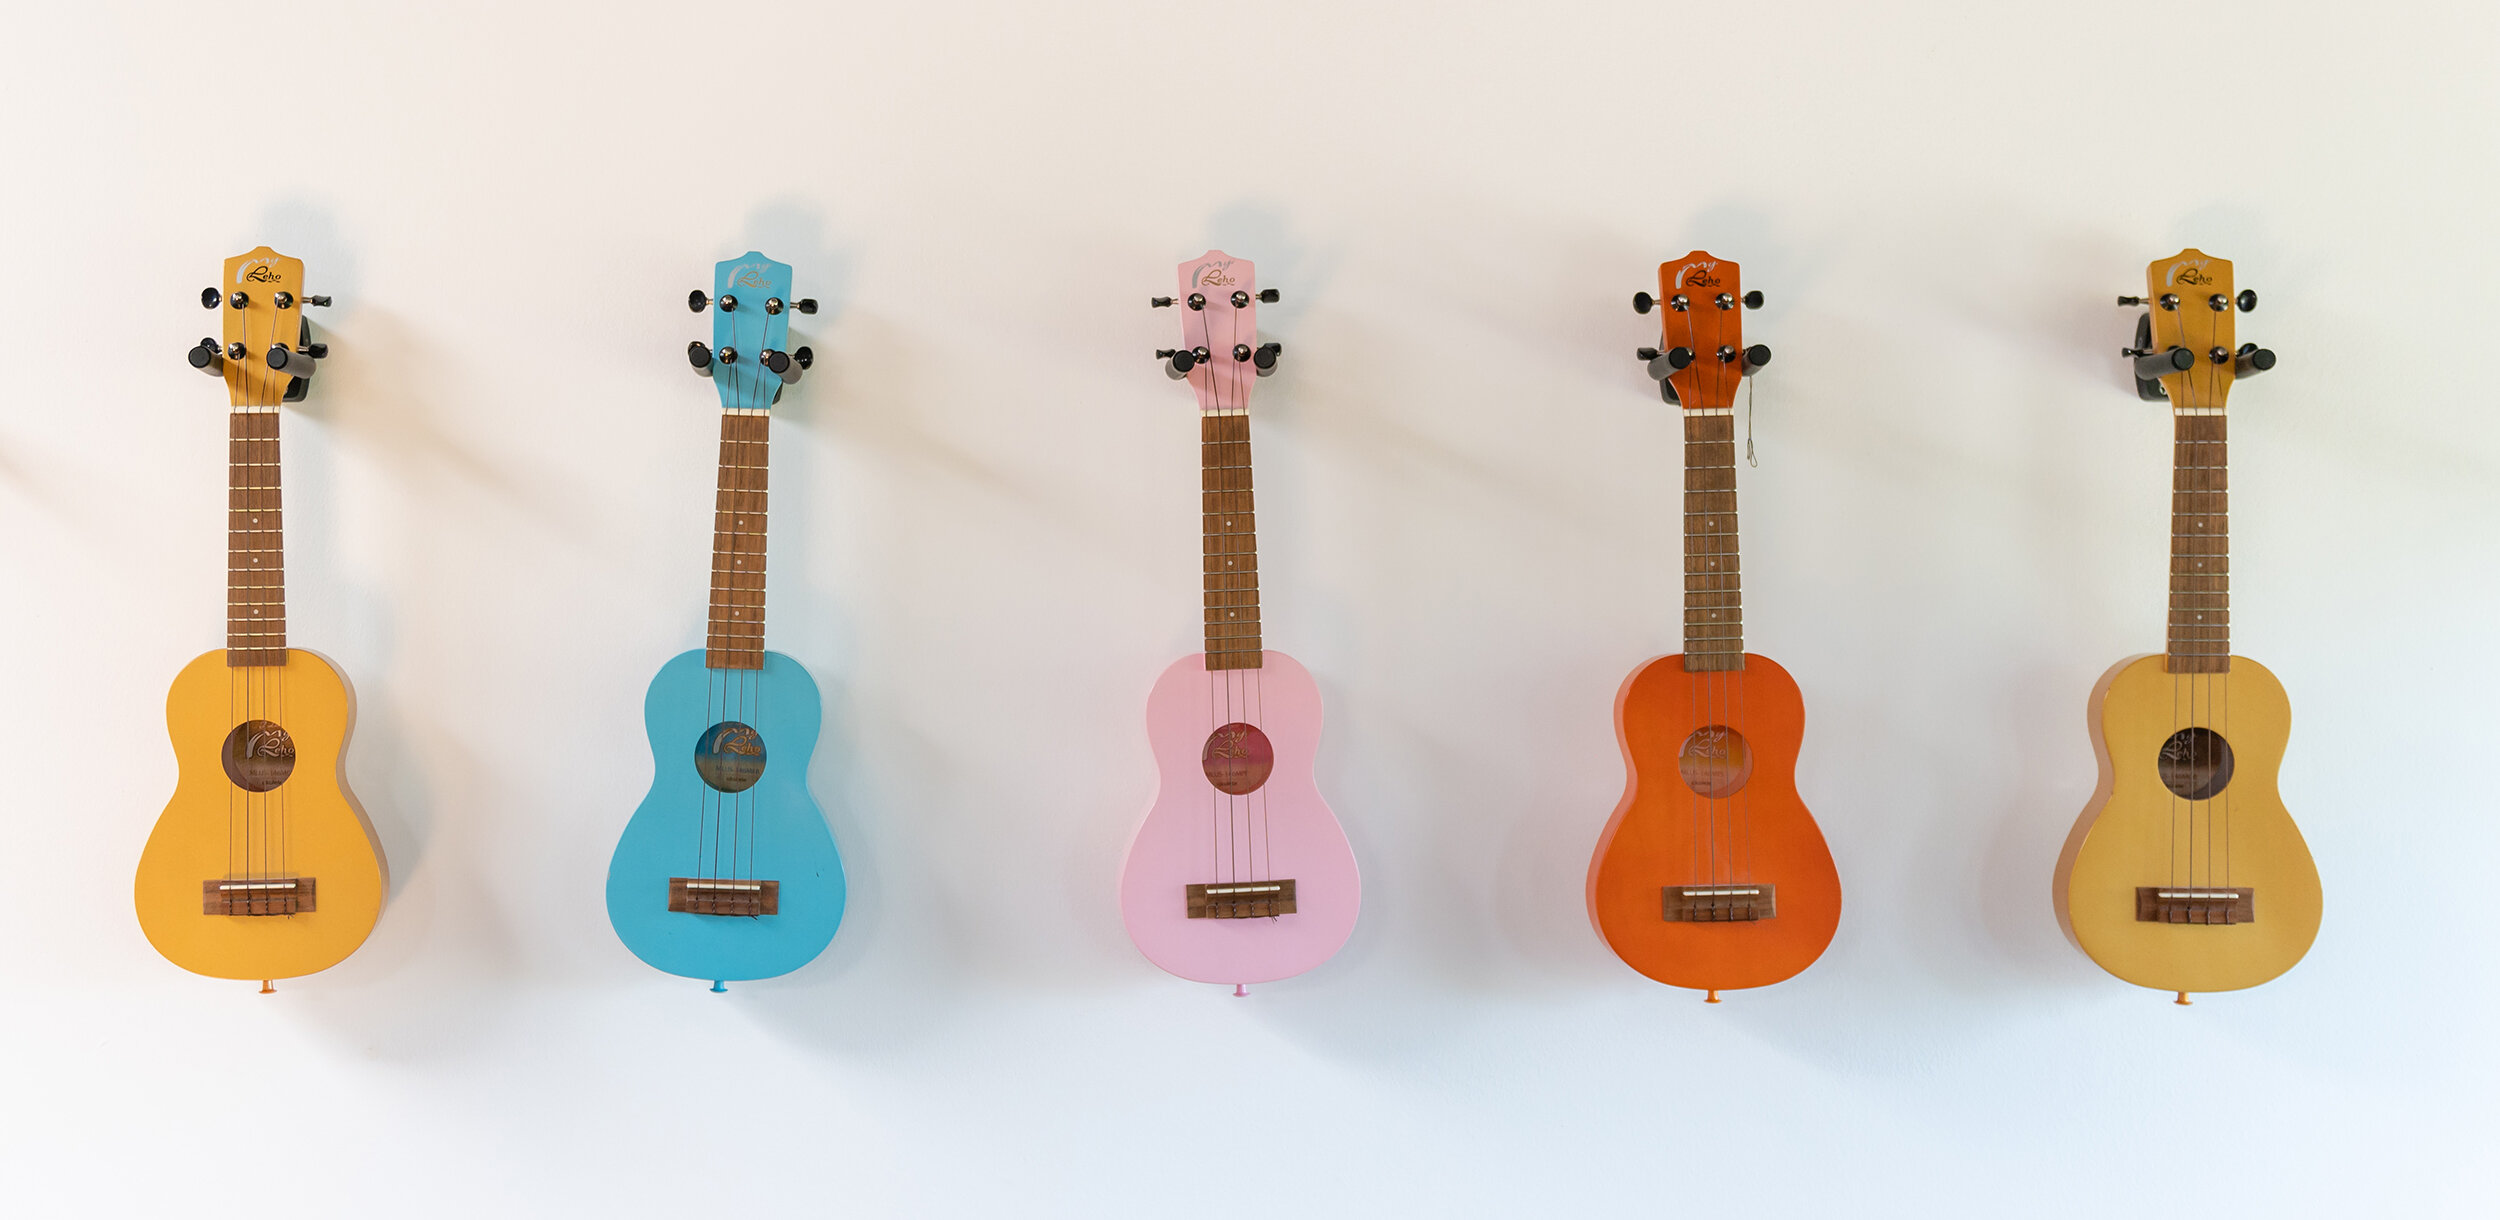 Ukuleles hang in a row on the wall.